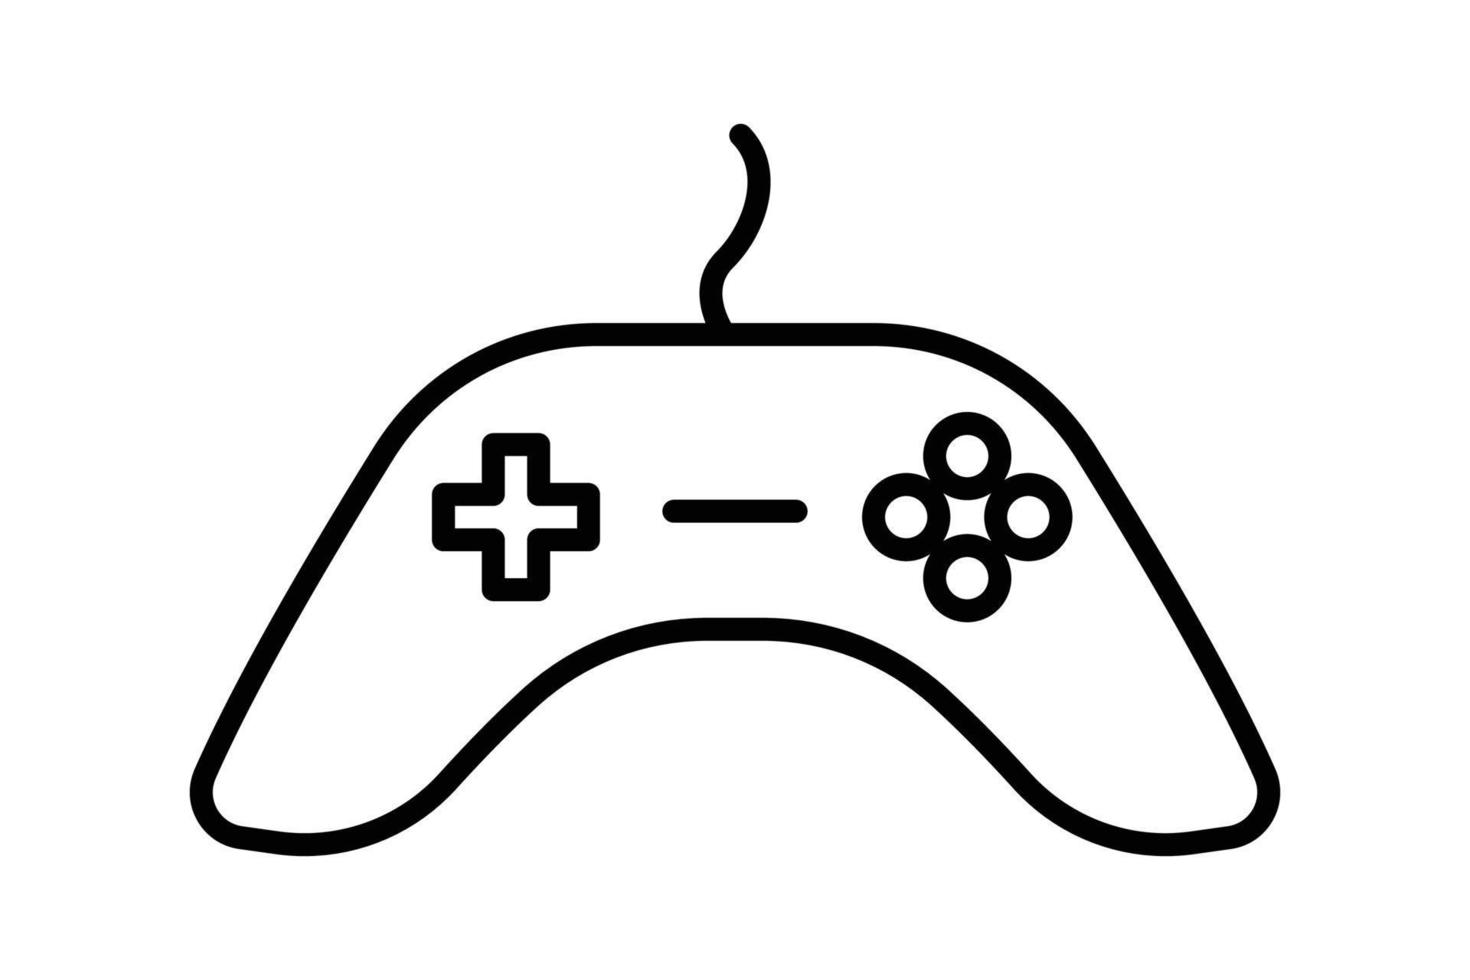 Gamepad icon illustration. icon related to multimedia. Line icon style. Simple vector design editable